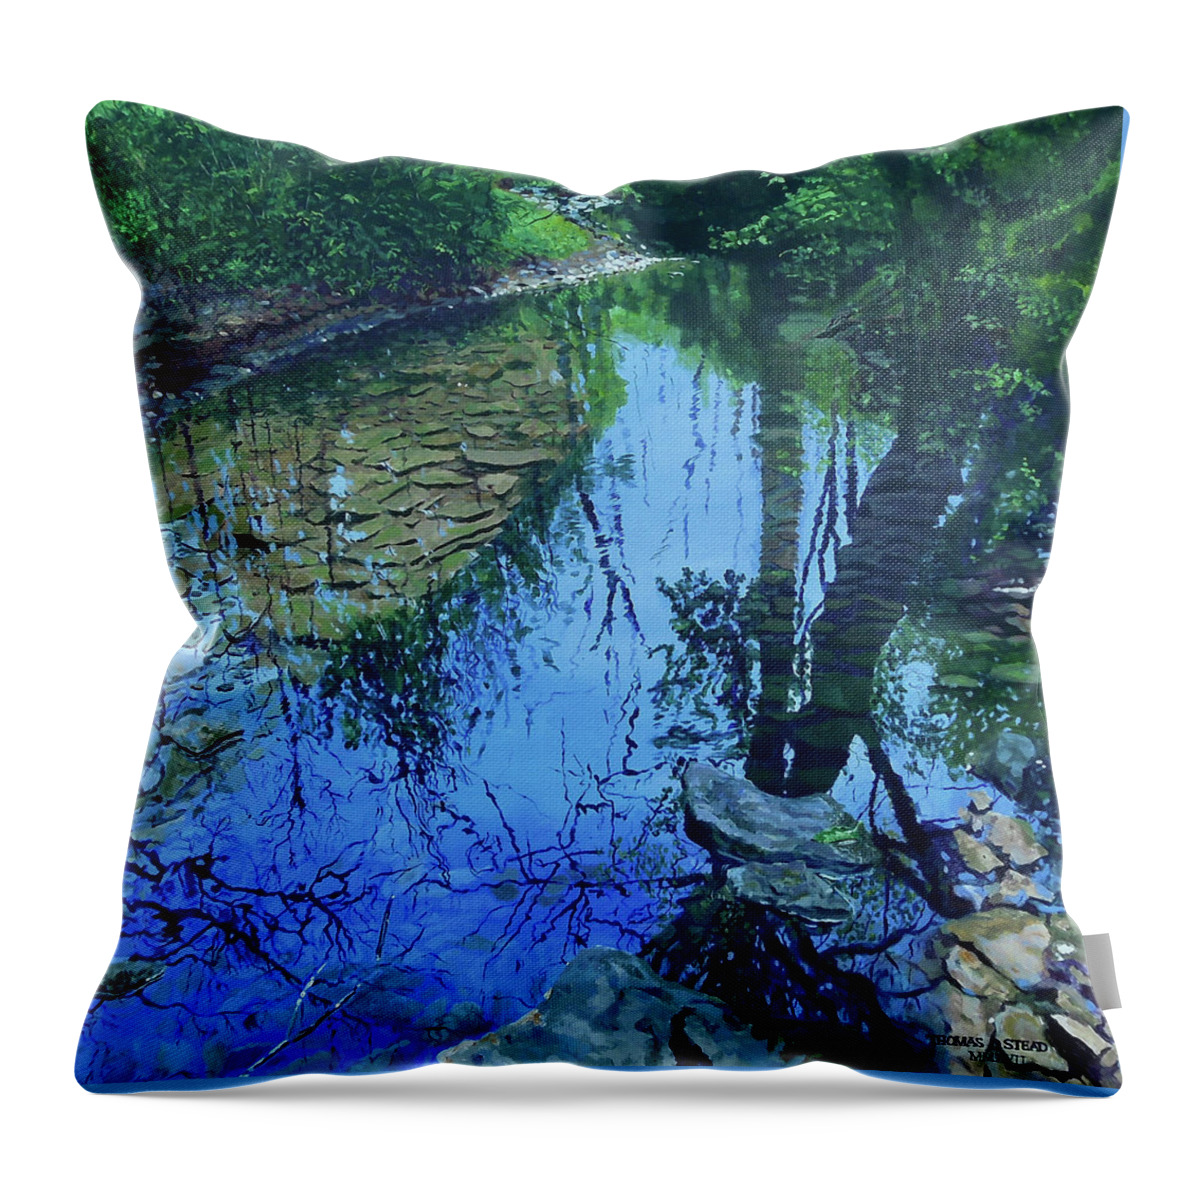 Reflections Throw Pillow featuring the painting Amberly Creek by Thomas Stead